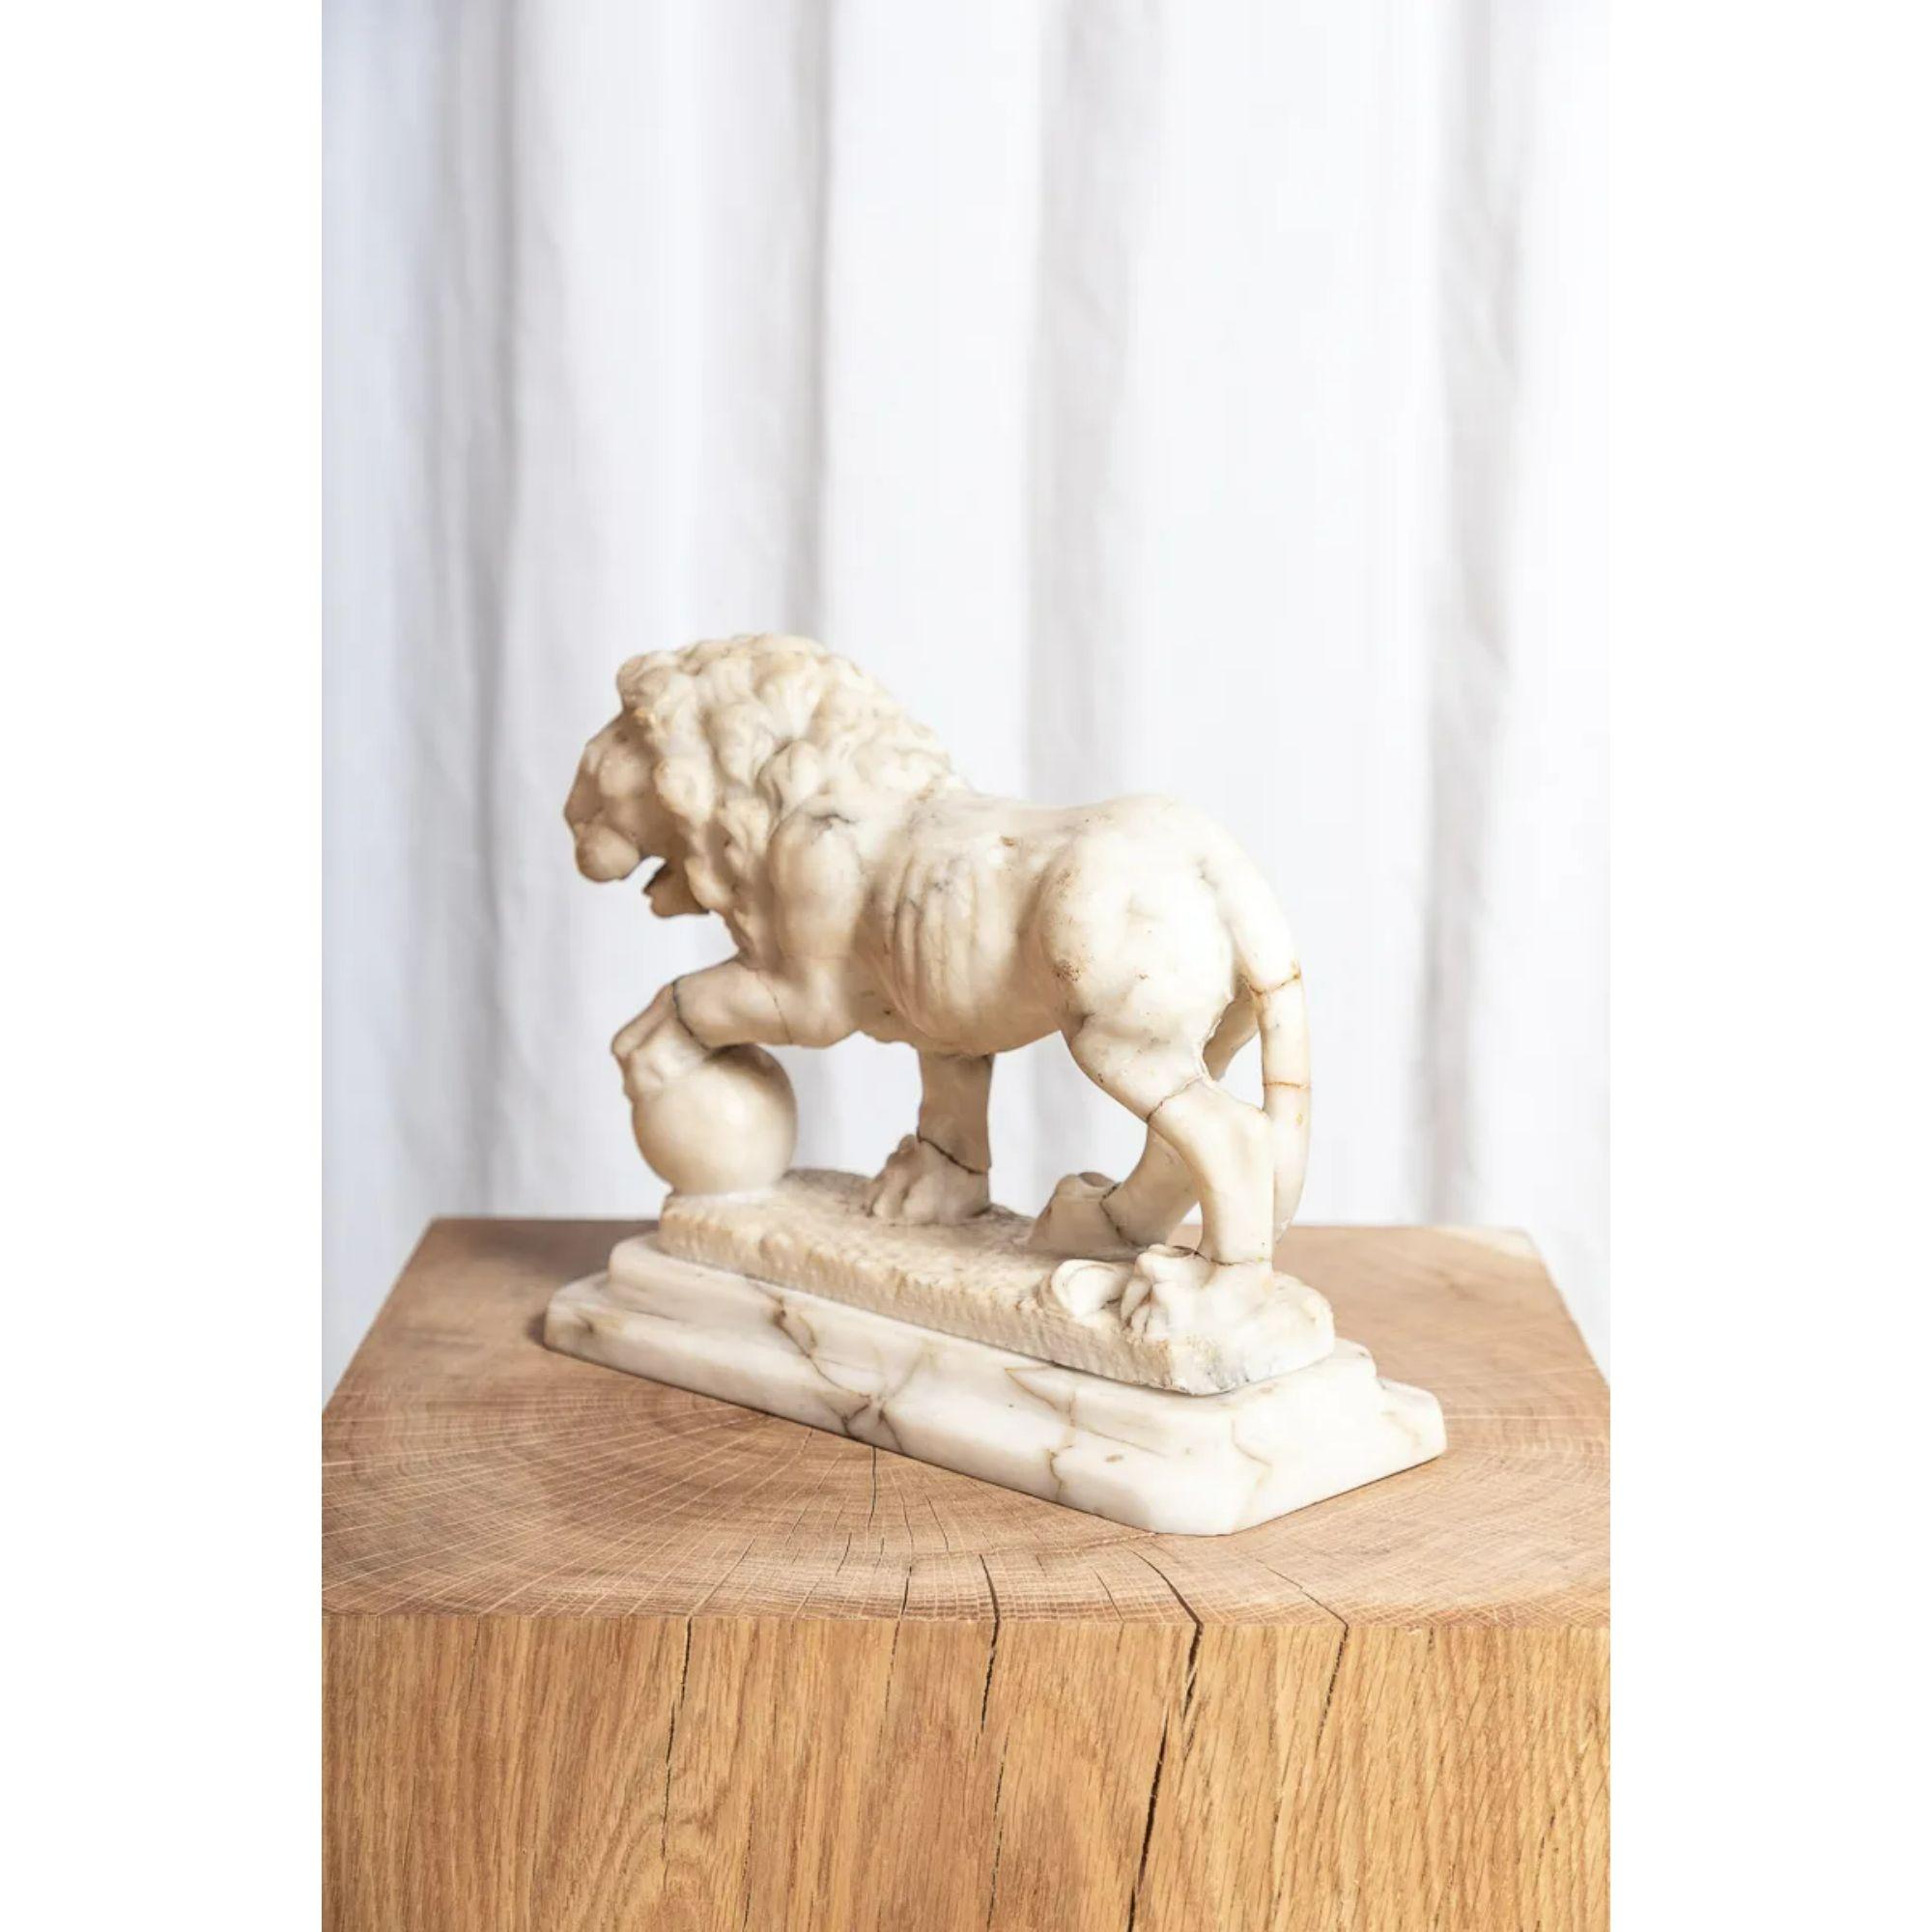 Italian Alabaster Figure of the Medici Lion

Late 19th century Italian carved alabaster 'Grand Tour' souvenir sculpture, after the antique, 